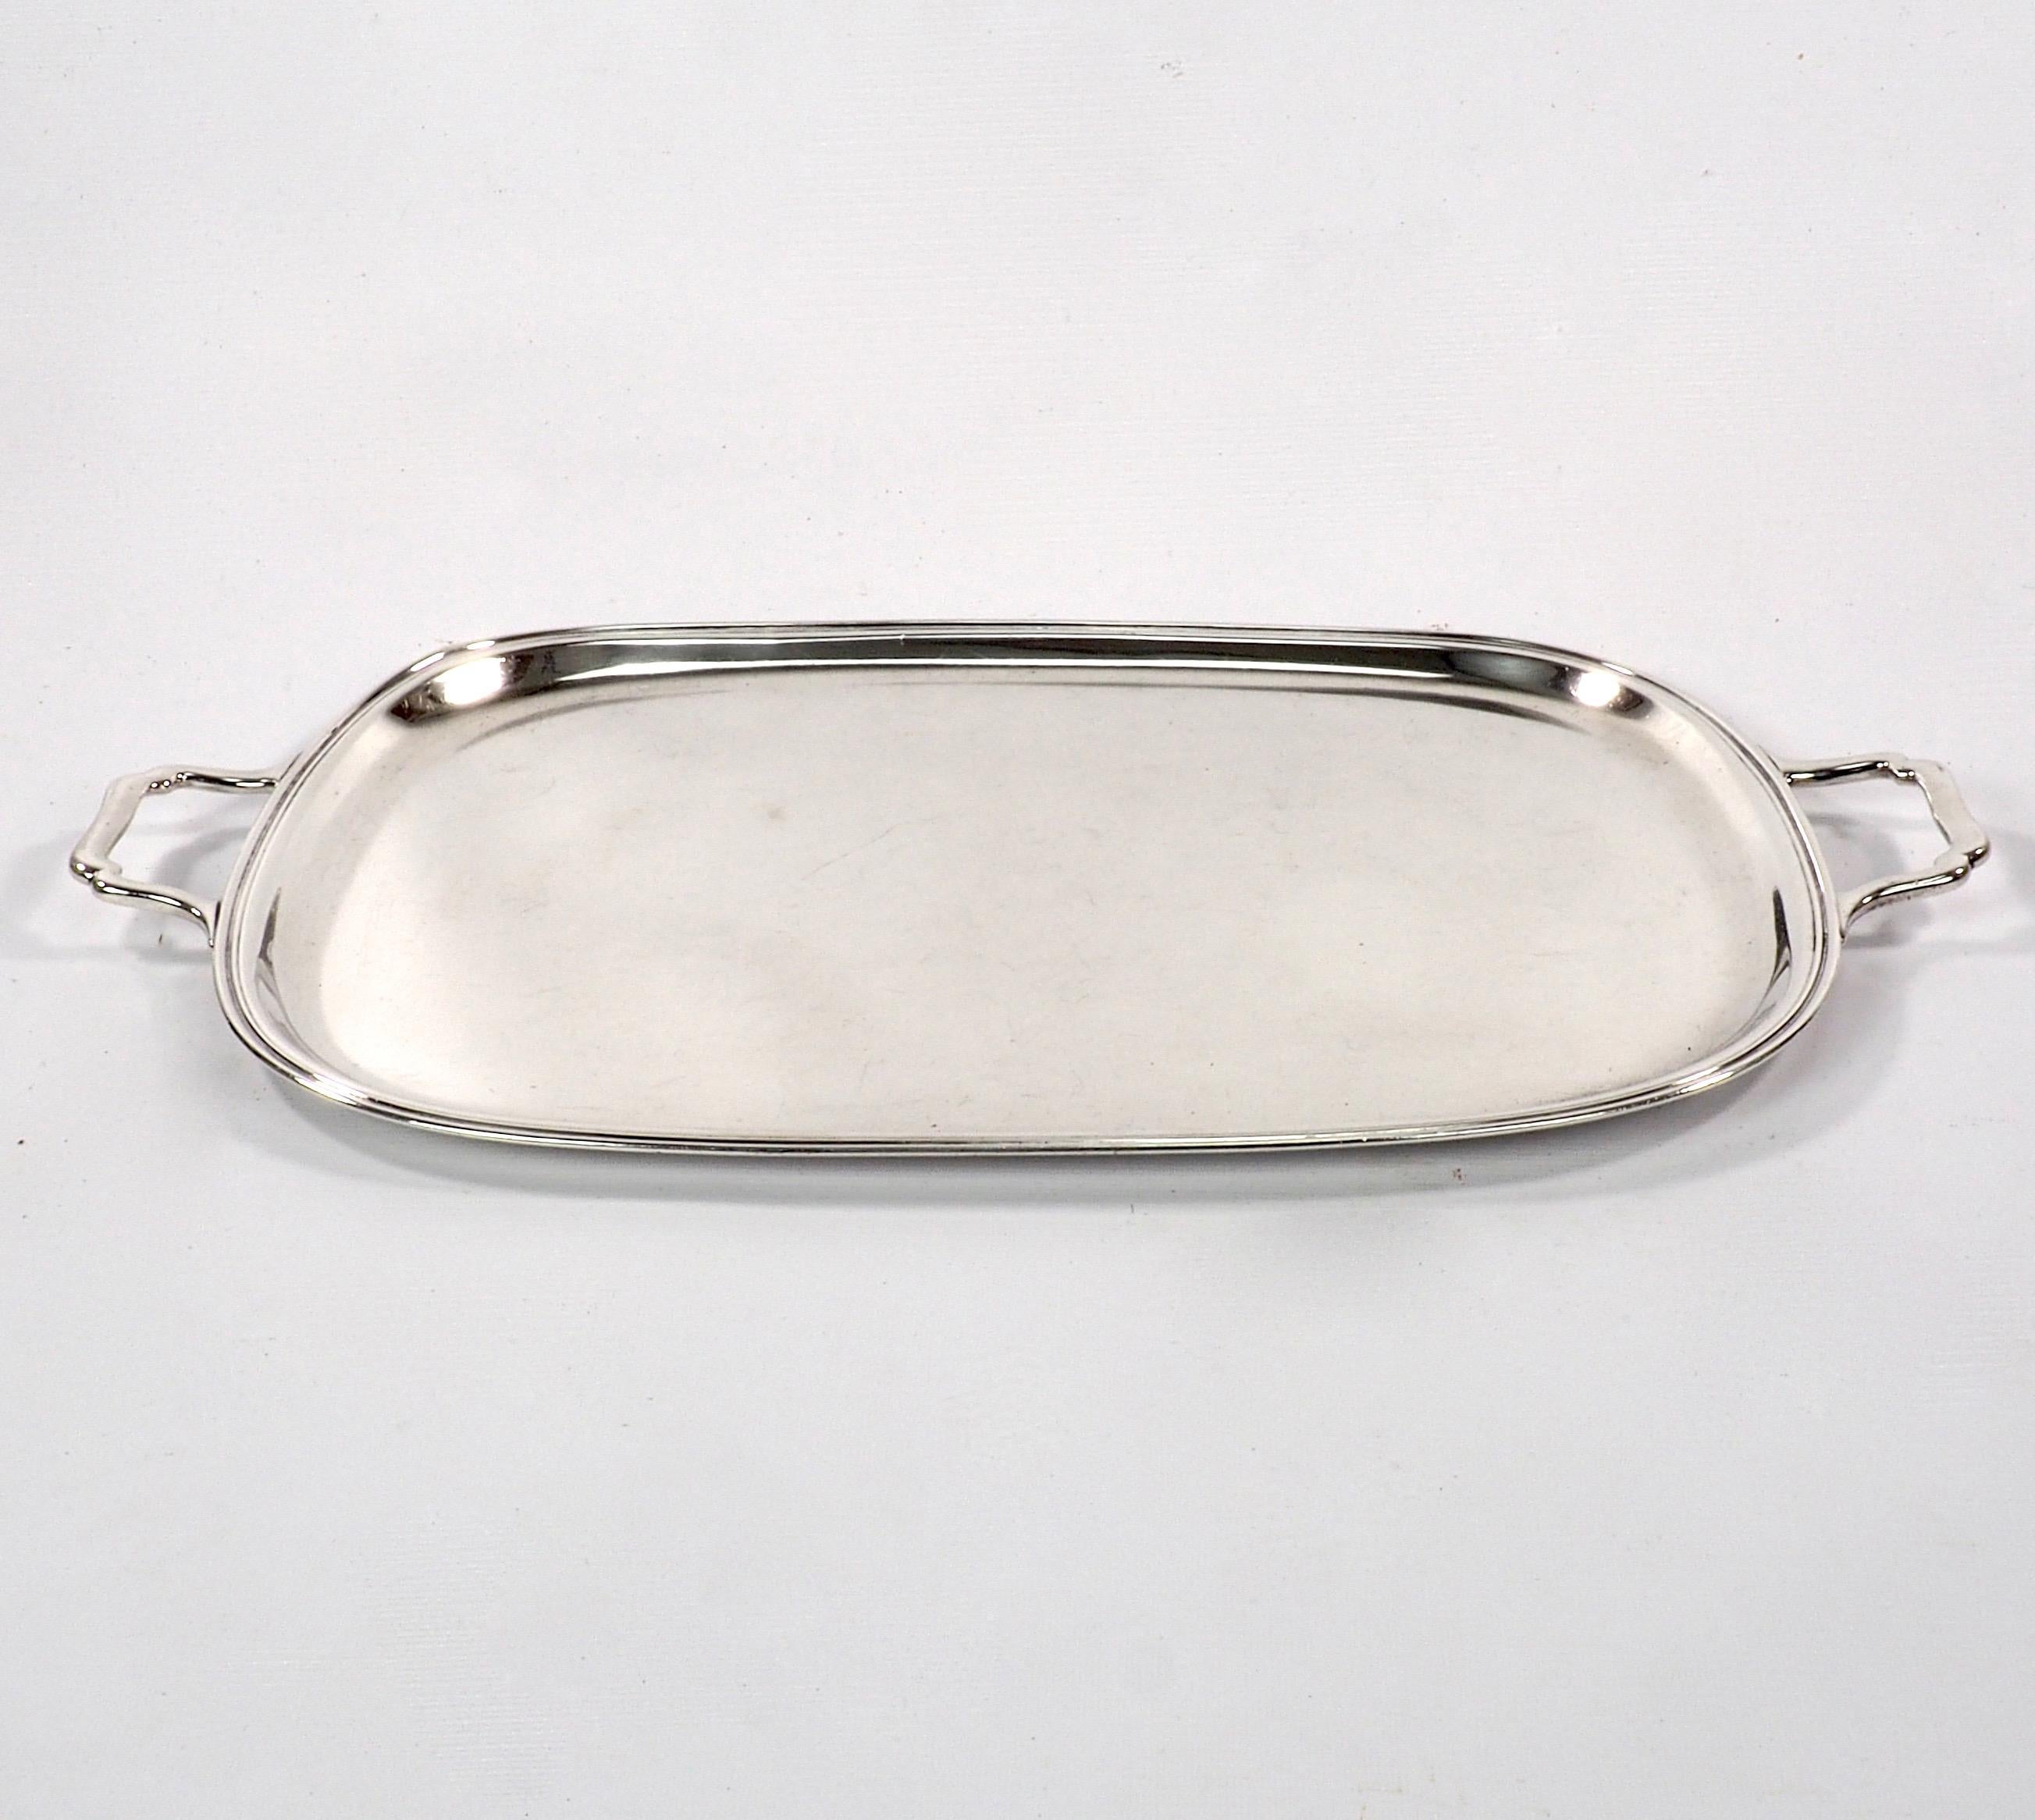 A large and important American solid sterling silver tray with elegant scrolled silver handles and deep bevelled rim. Dating from the mid 19th century. A rare example of American silverware of this date. Stamped Sterling to base and weighing in at